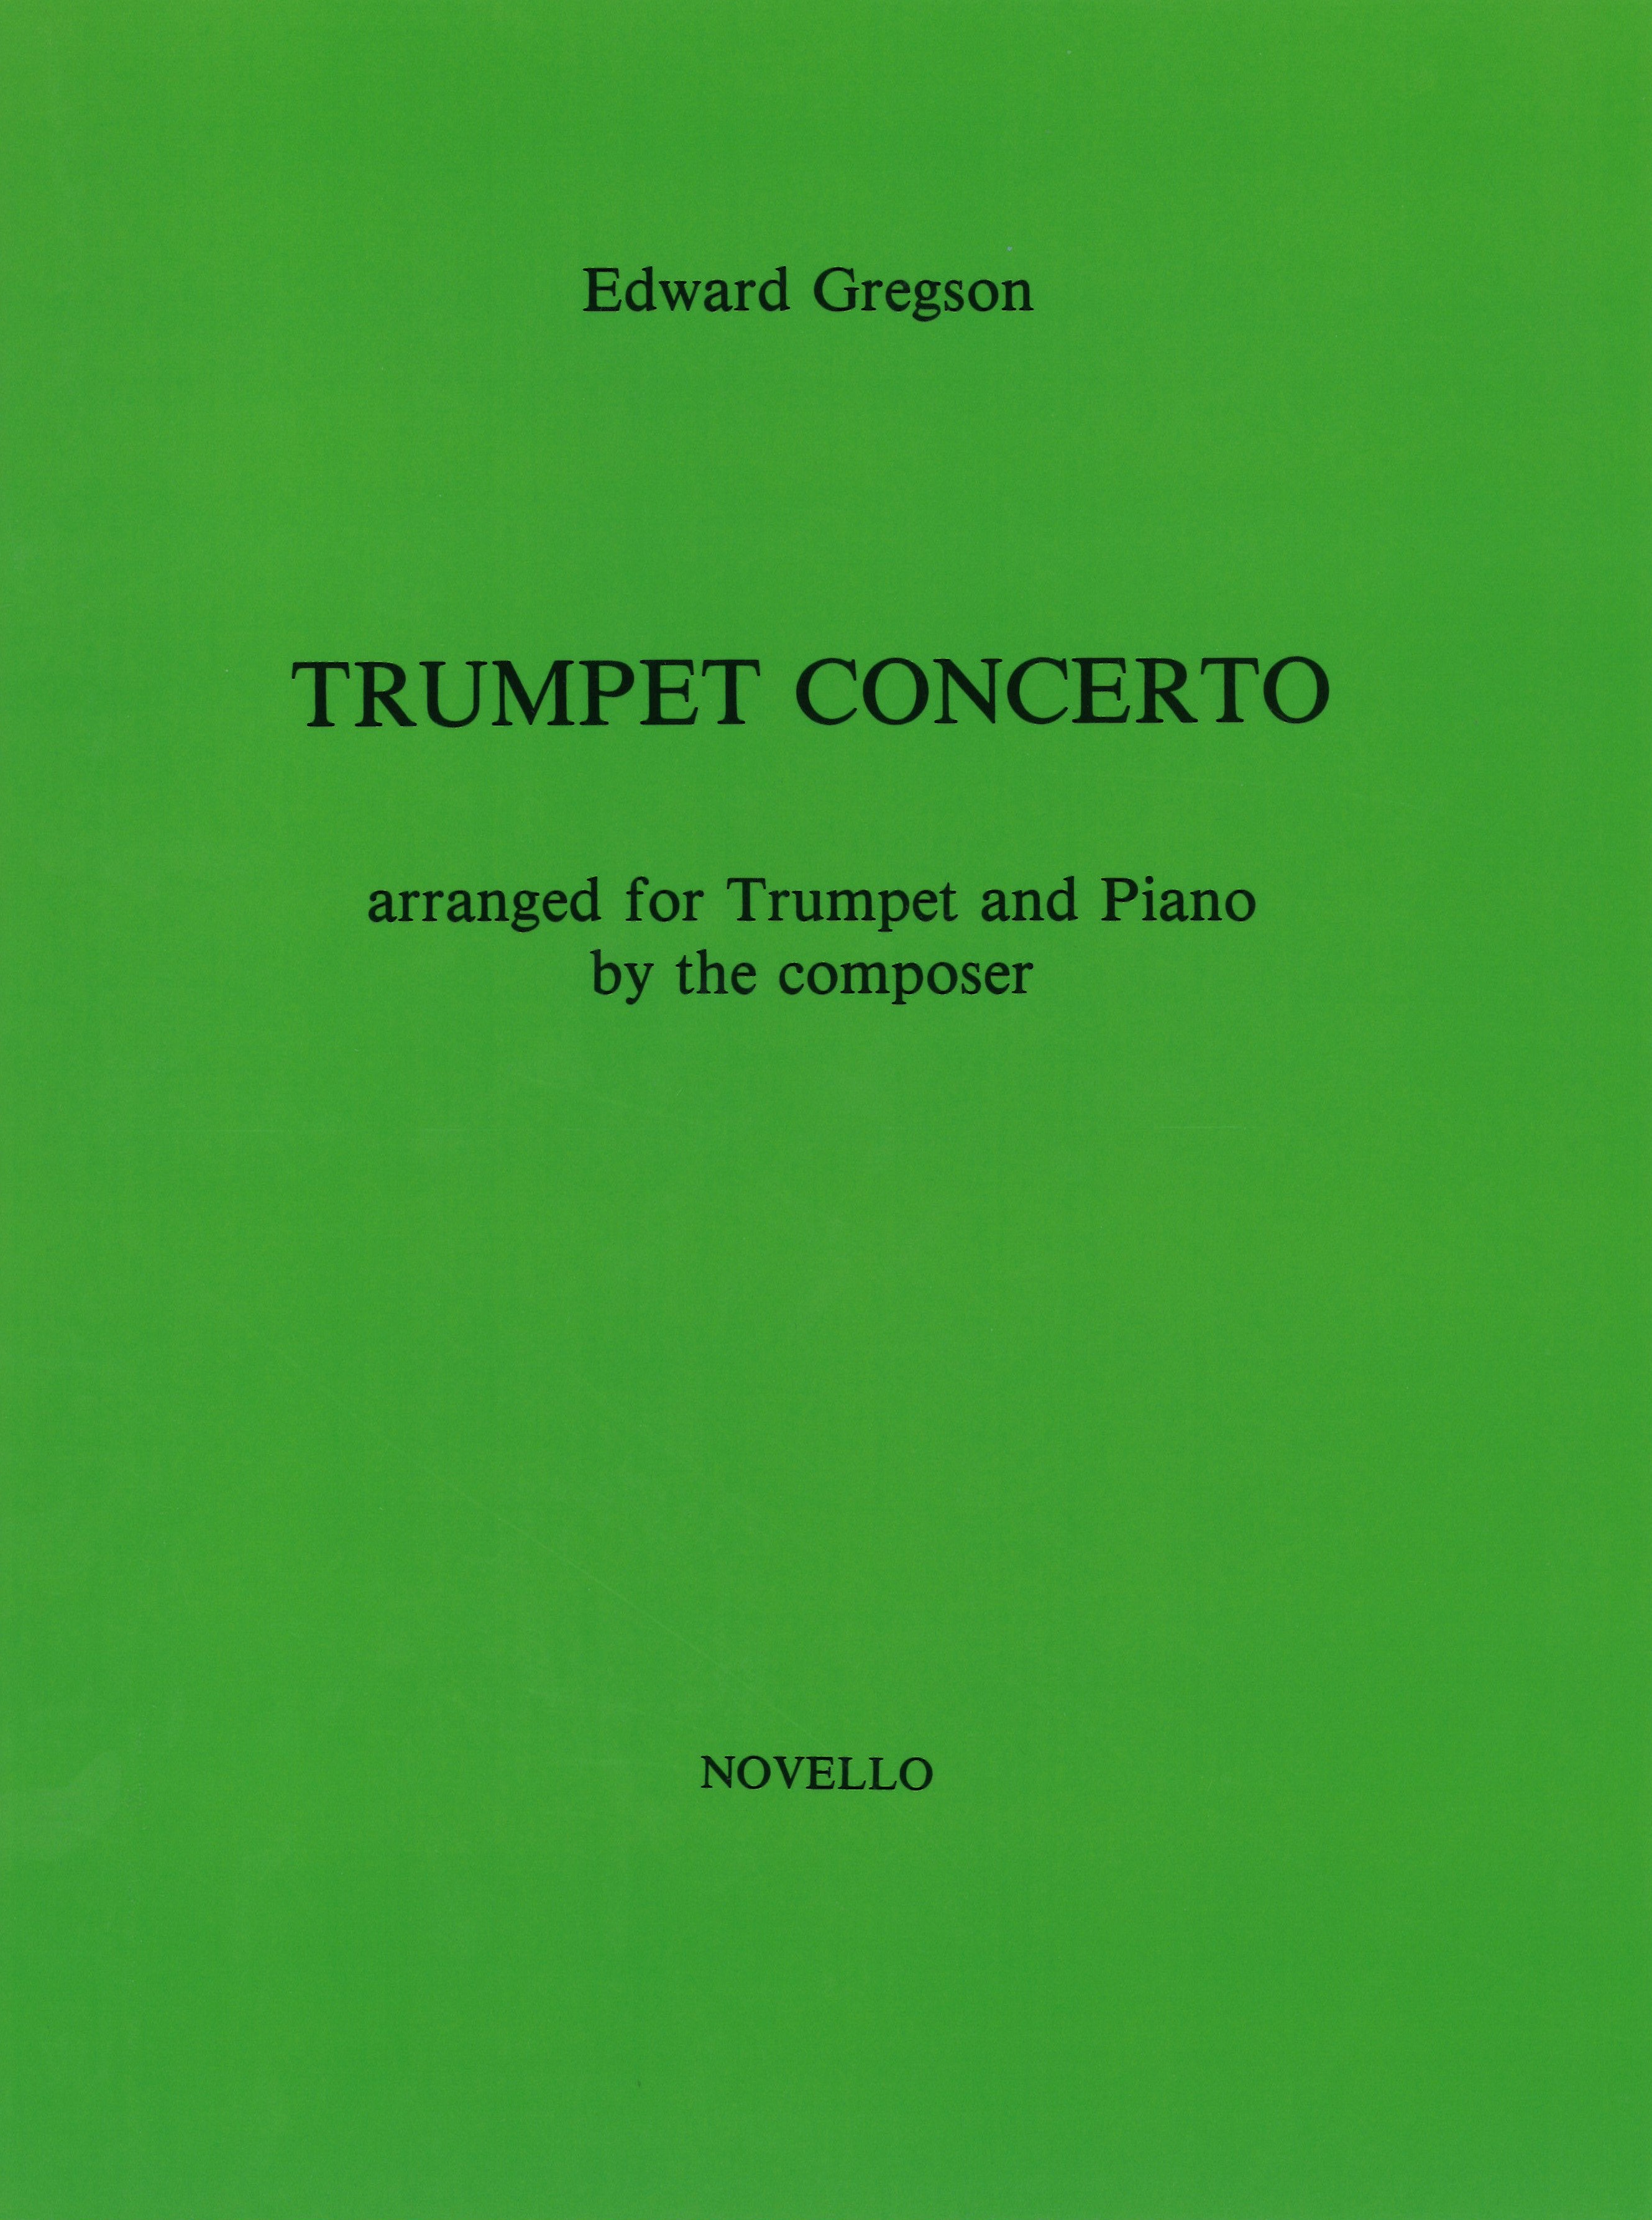 Gregson Concerto Trumpet Sheet Music Songbook